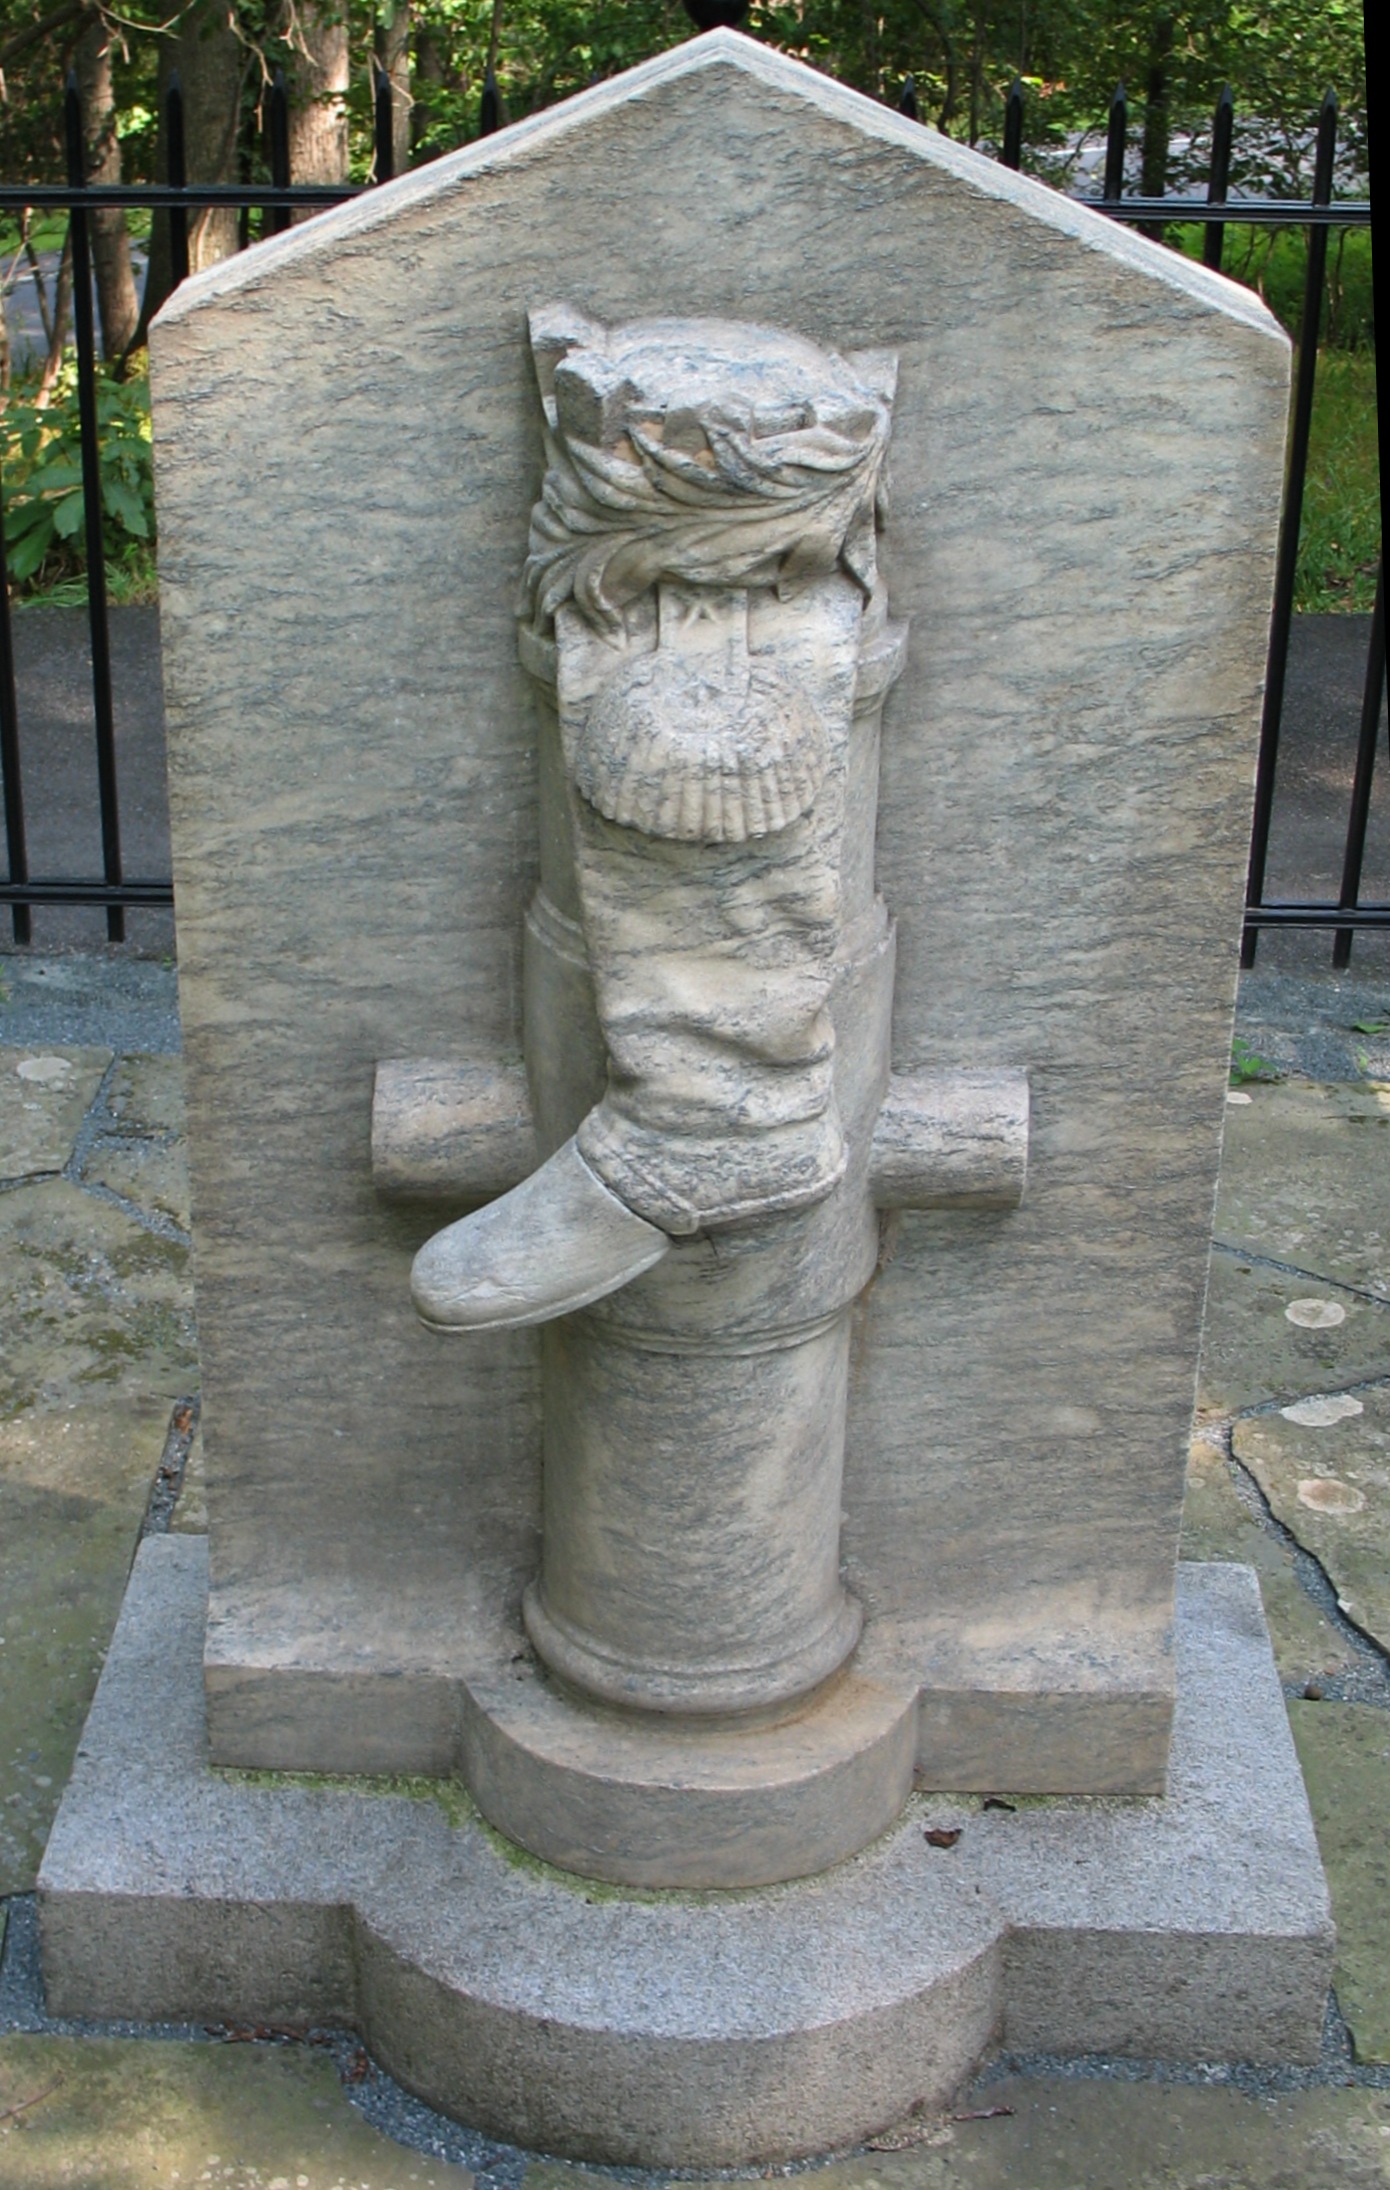 Boot Monument at Saratoga National Battlefield in New York commemorating the wounded foot of :Benedict Arnold. Photo taken on August 18, 2006.